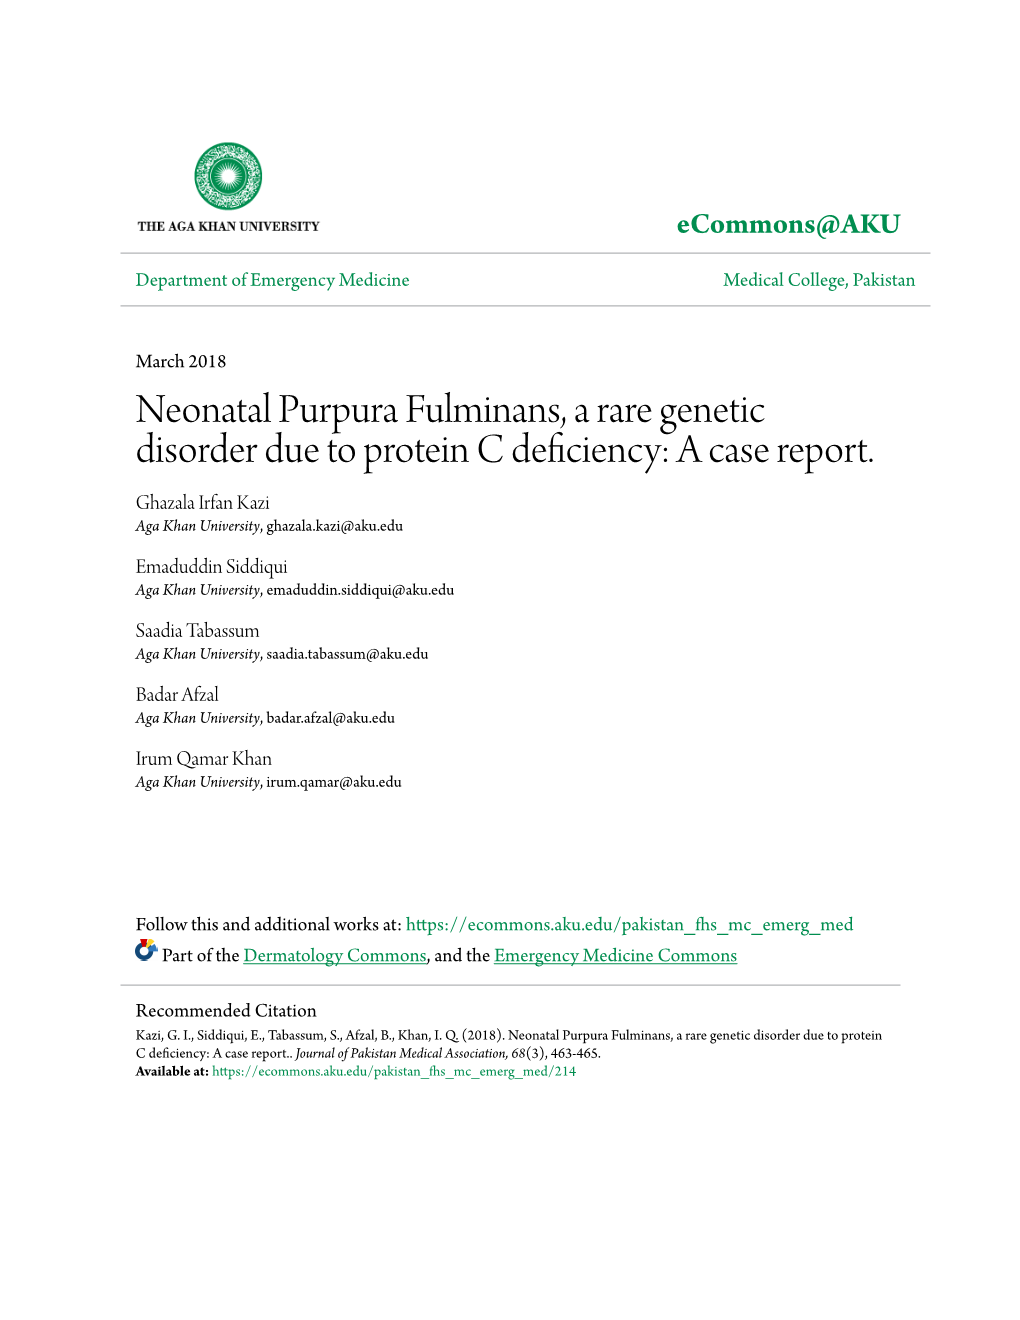 Neonatal Purpura Fulminans, a Rare Genetic Disorder Due to Protein C Deficiency: a Case Report